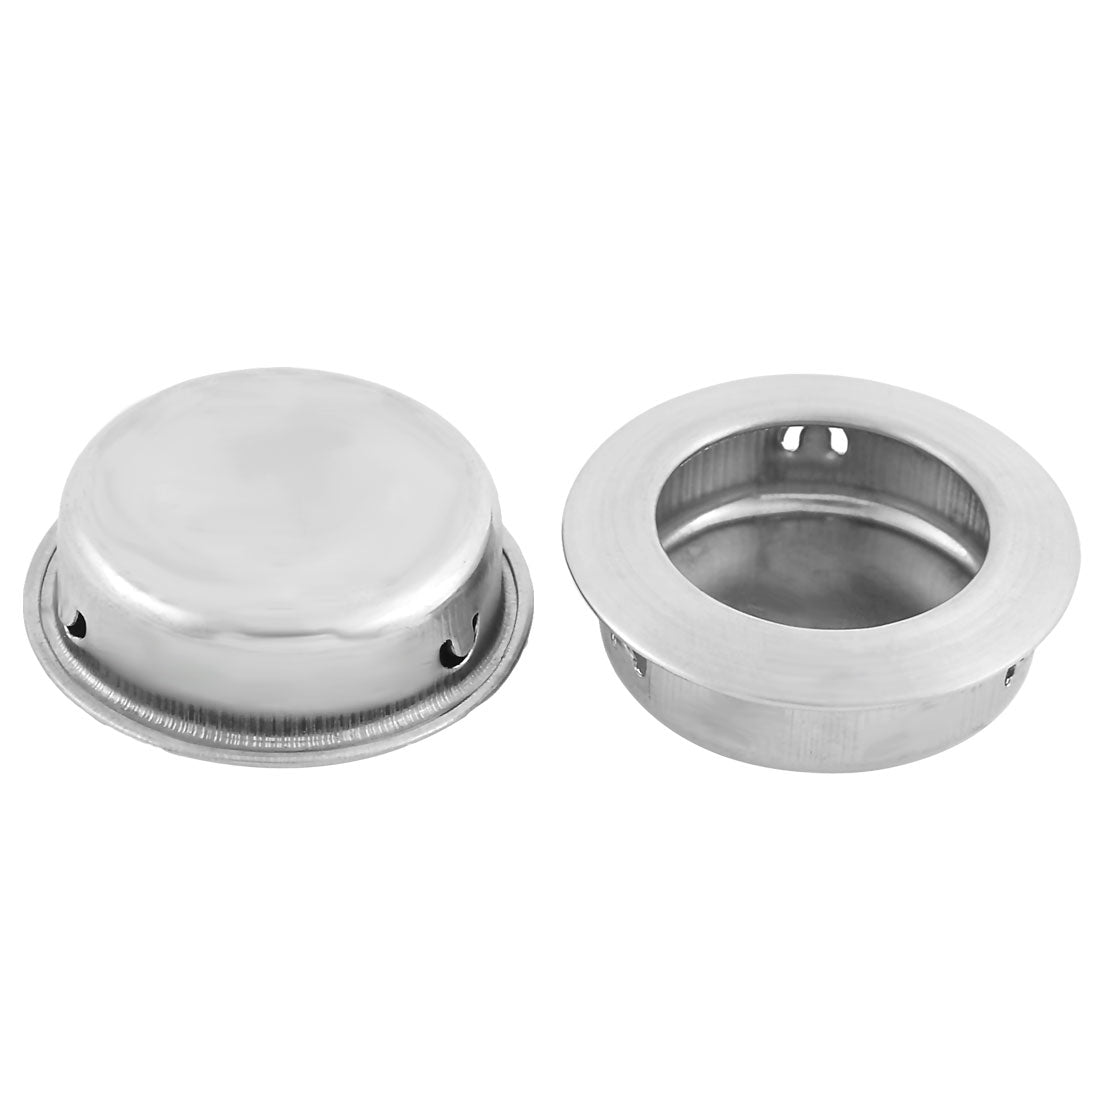 uxcell Uxcell Cabinet Stainless Steel Circular Recessed Flush Door Handle Pull 40mm Dia 2 PCS